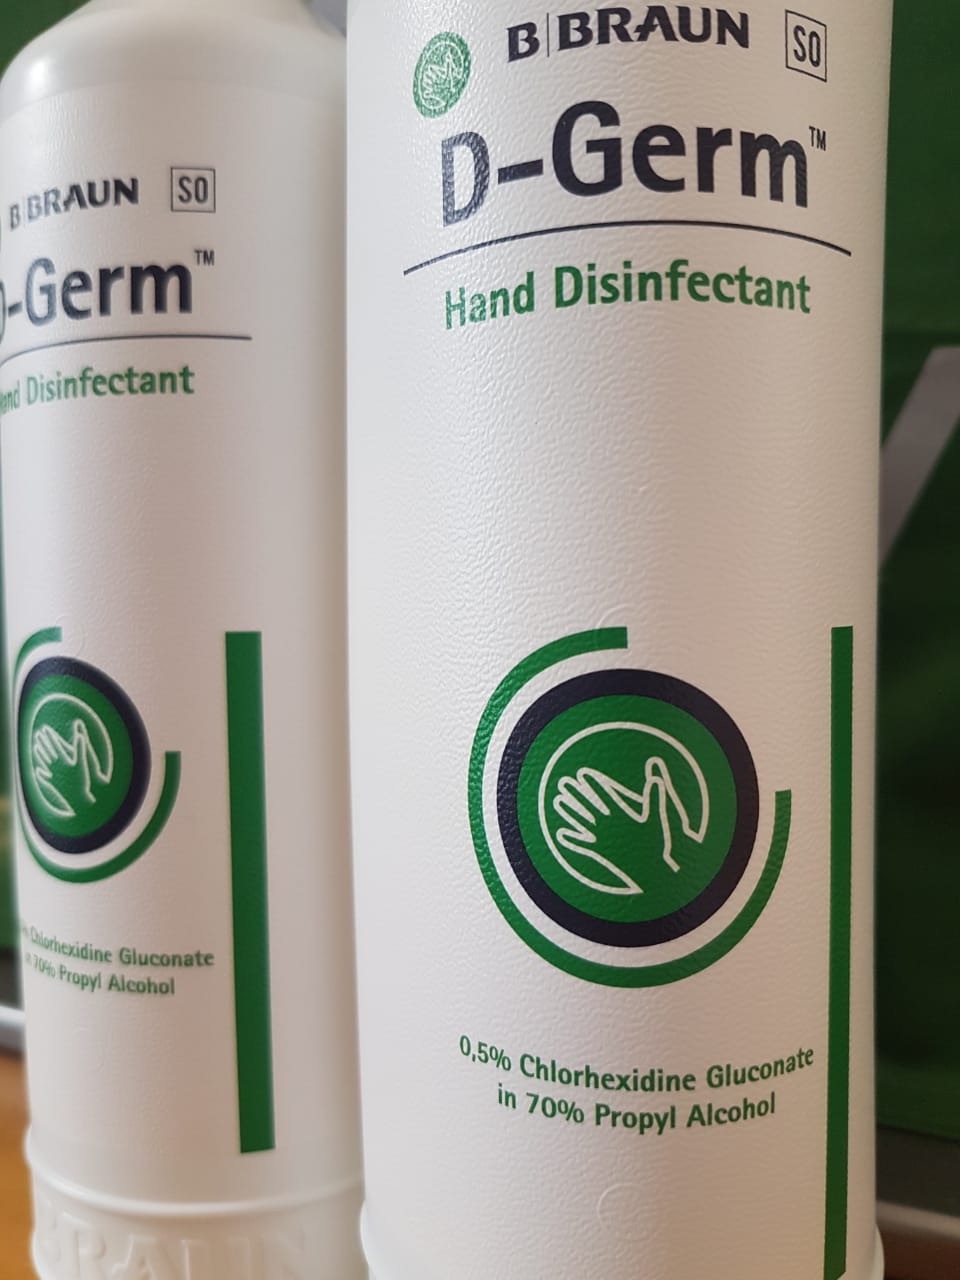 Hand disinfectant sanitizers in our tour buses, Hermanus, Cape Town, South Africa